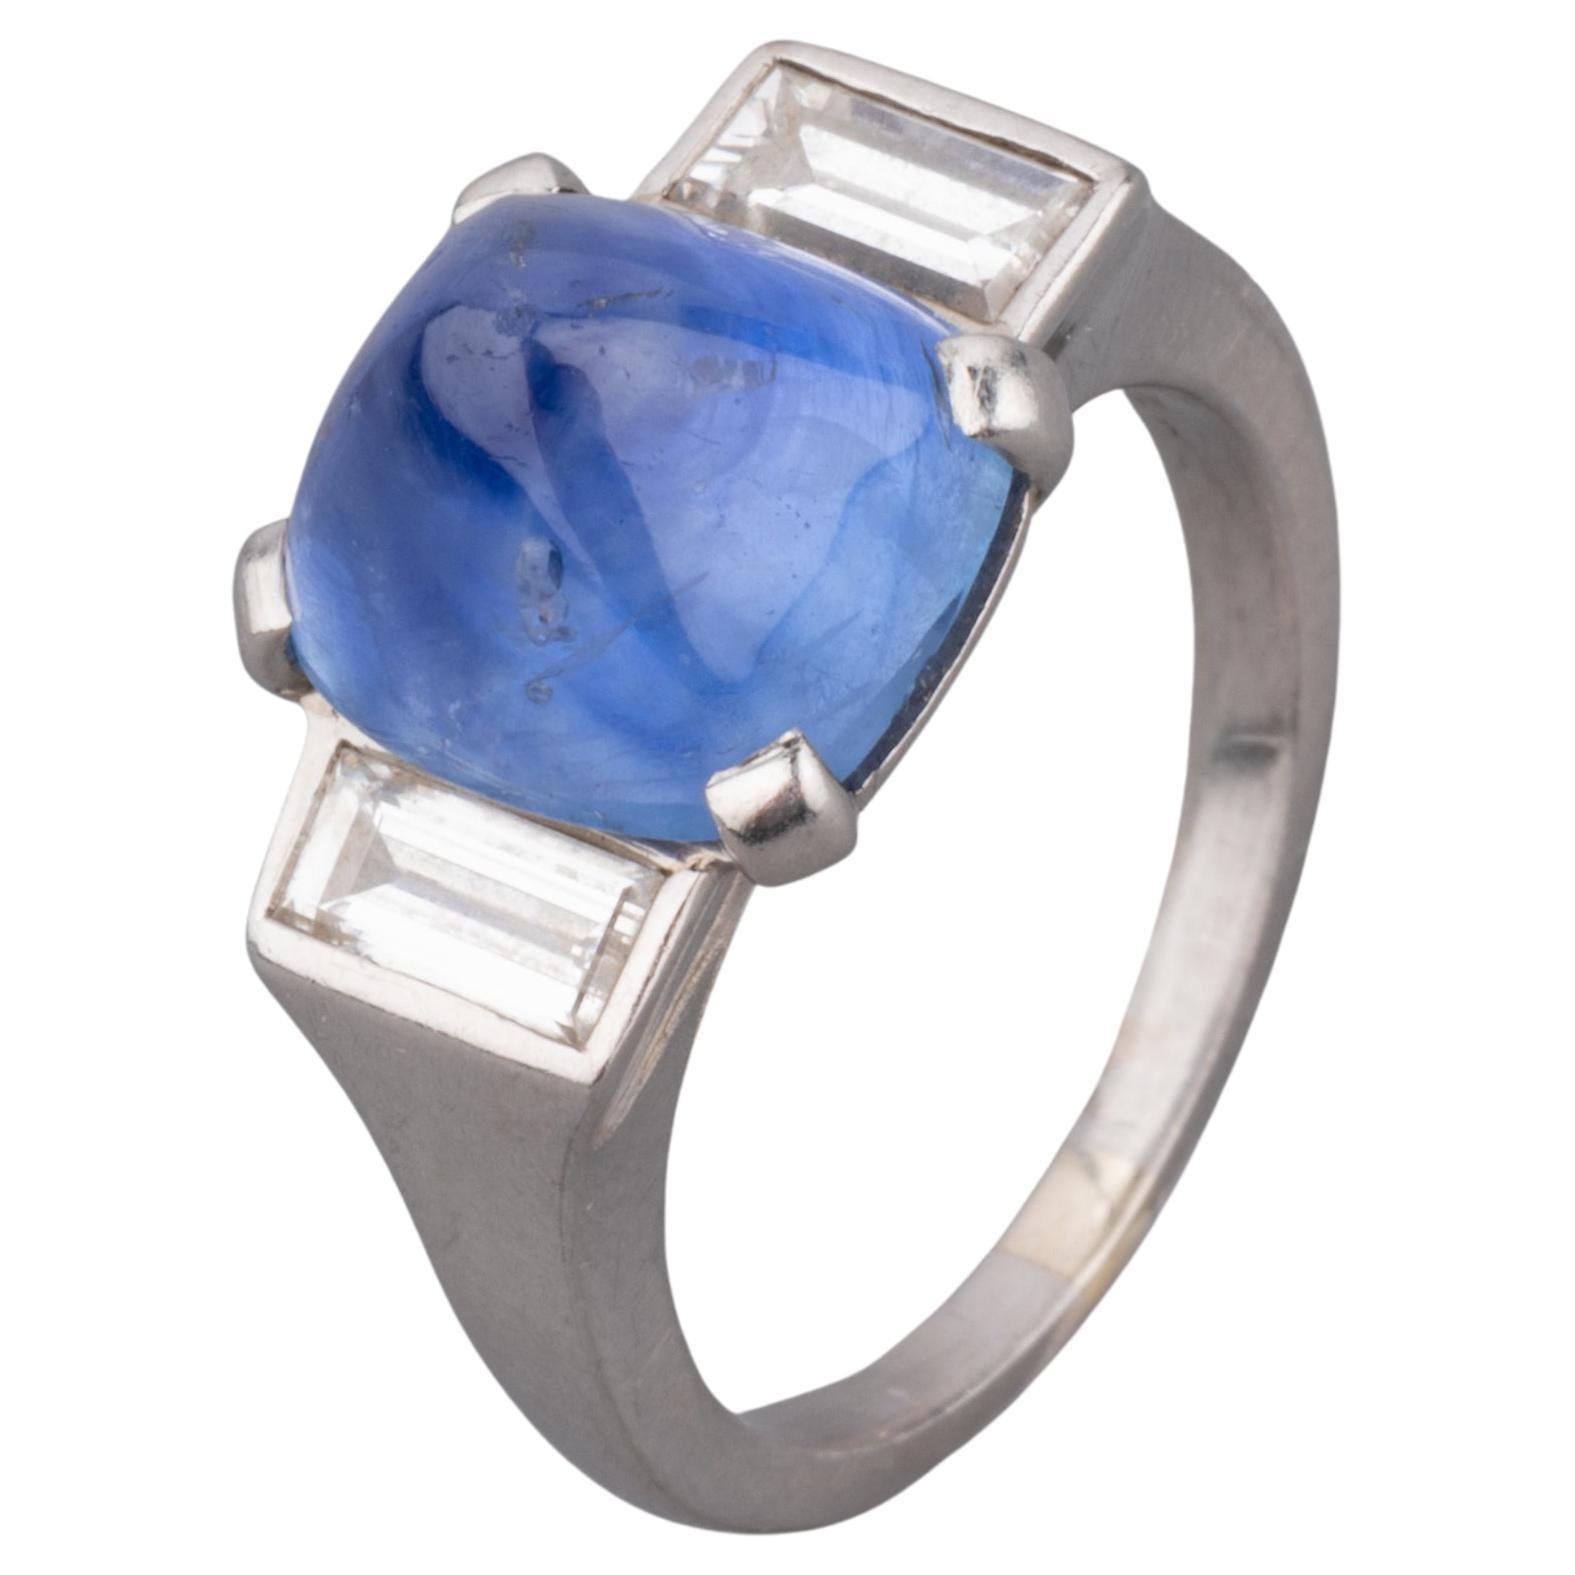 5 Carats Ceylan Sapphire and Diamonds Art Deco Ring by Mauboussin For Sale